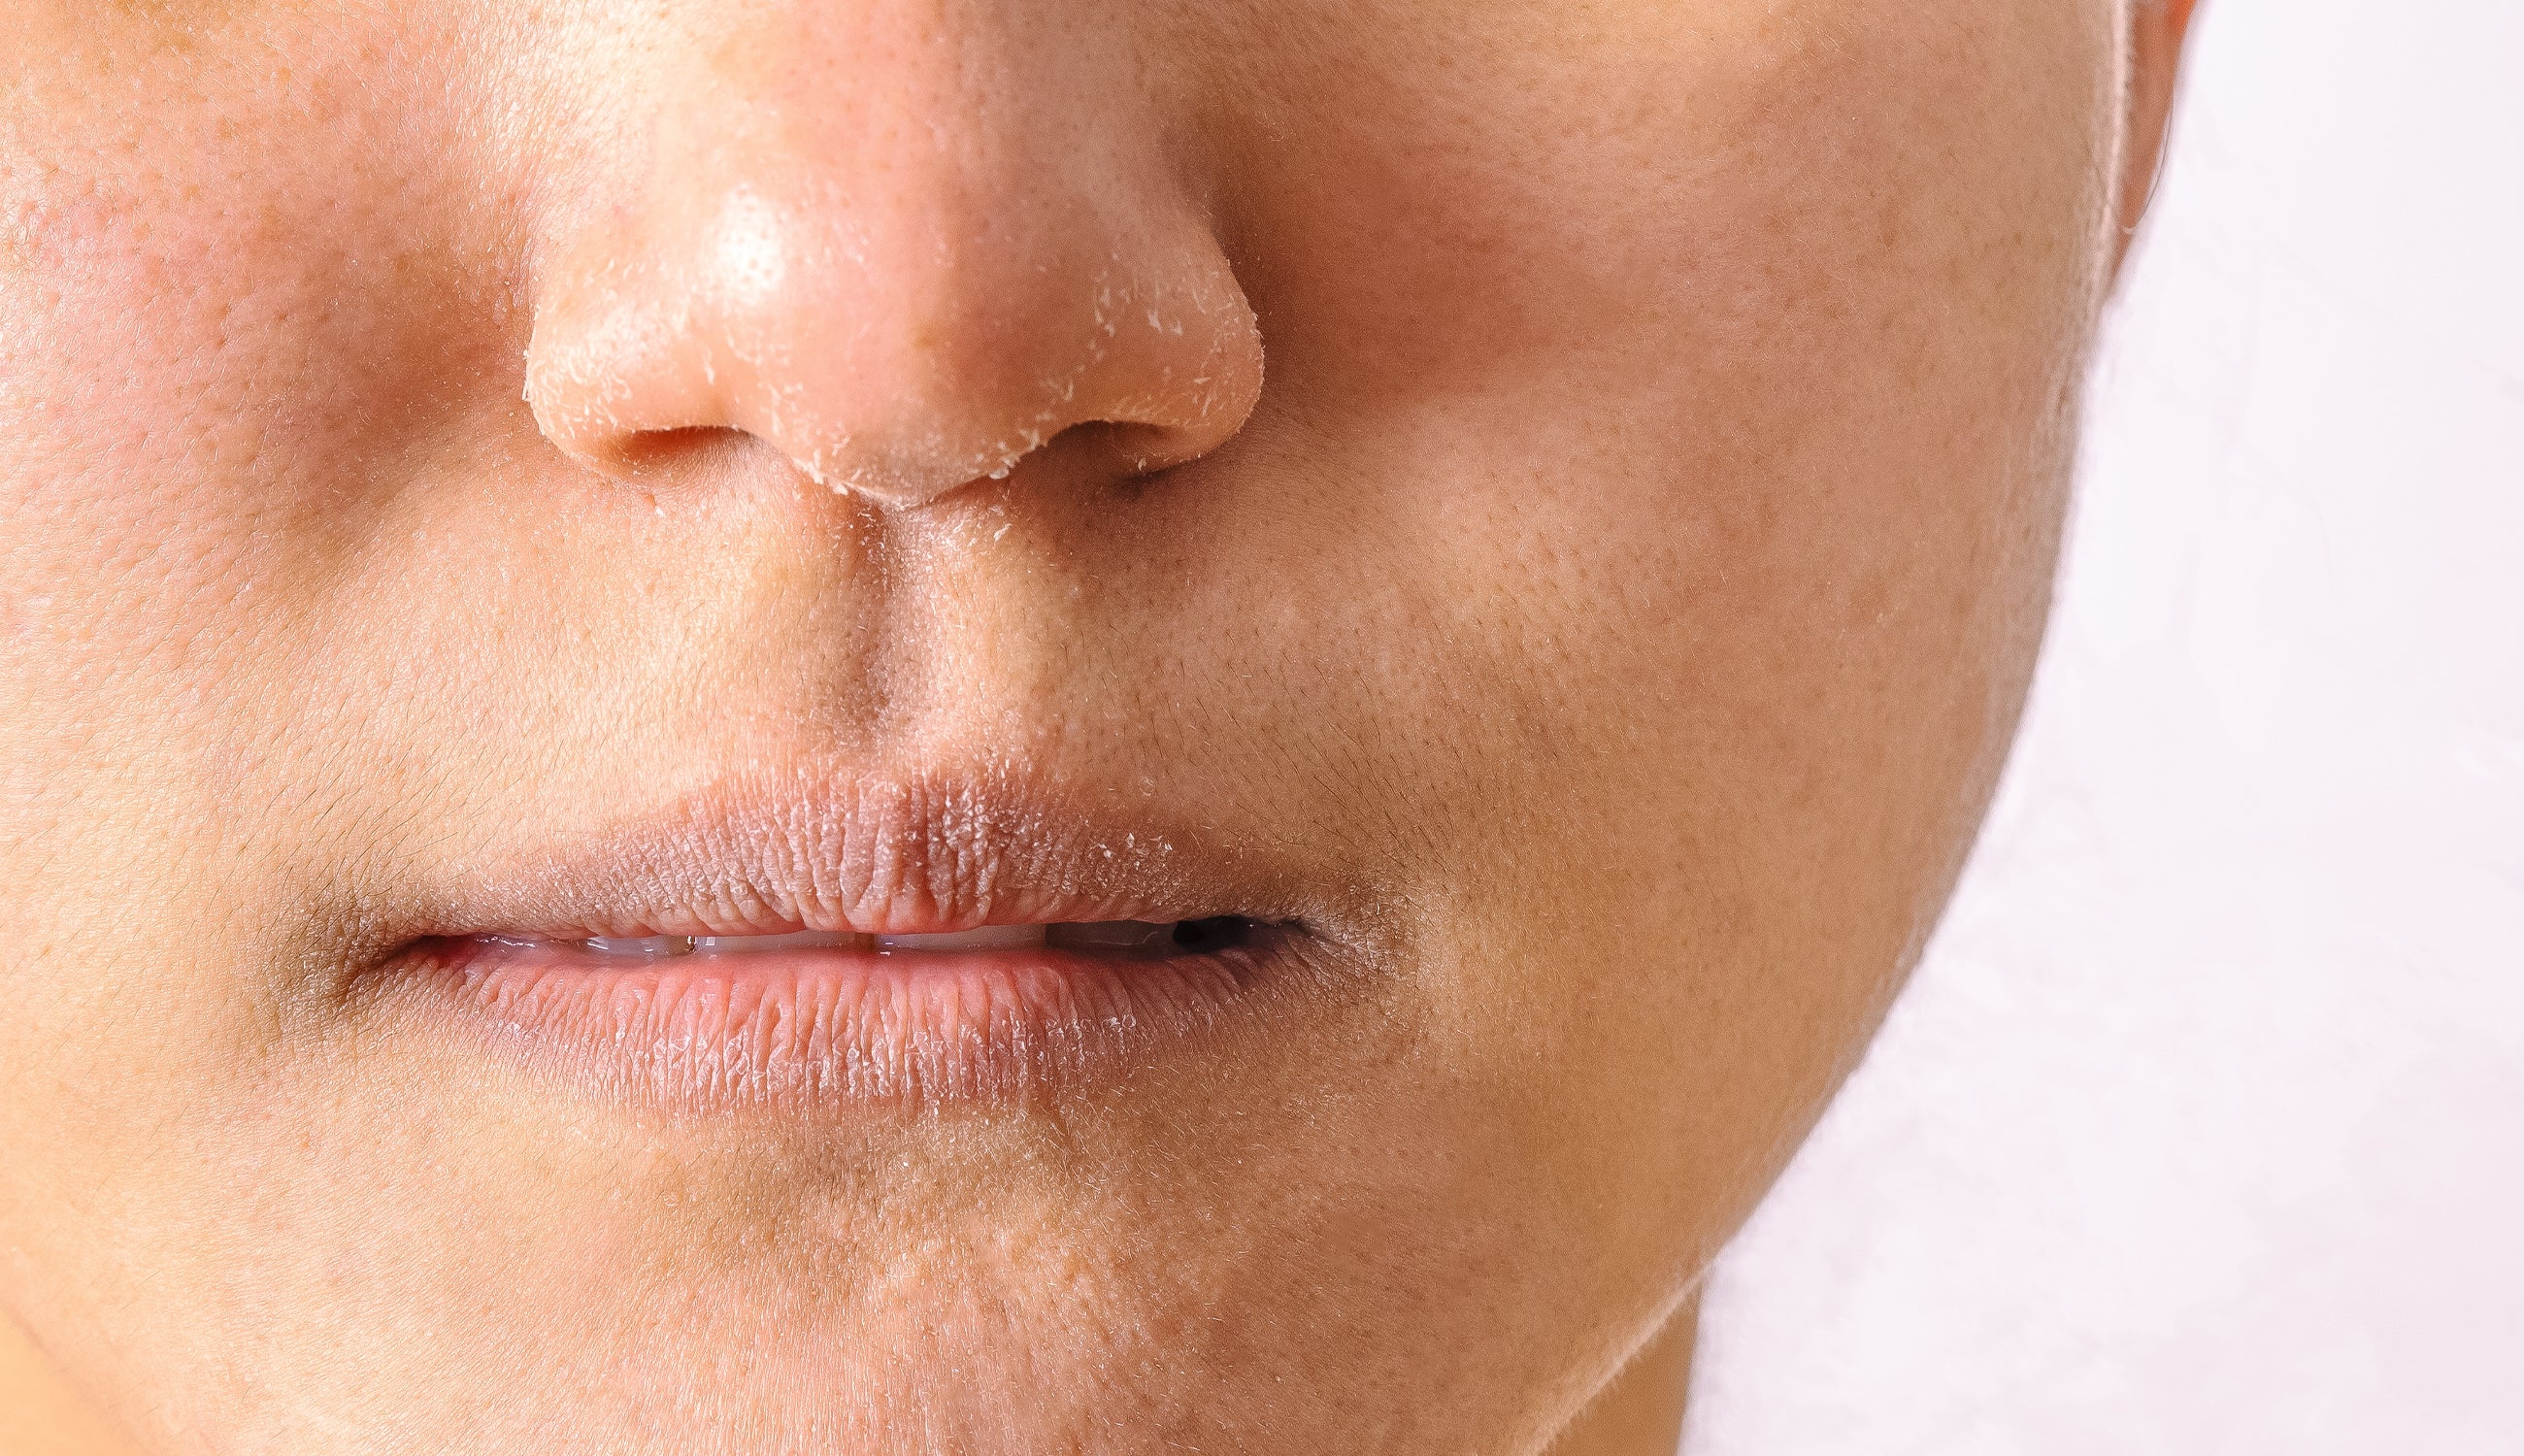 Woman with dry and peeling skin and lips